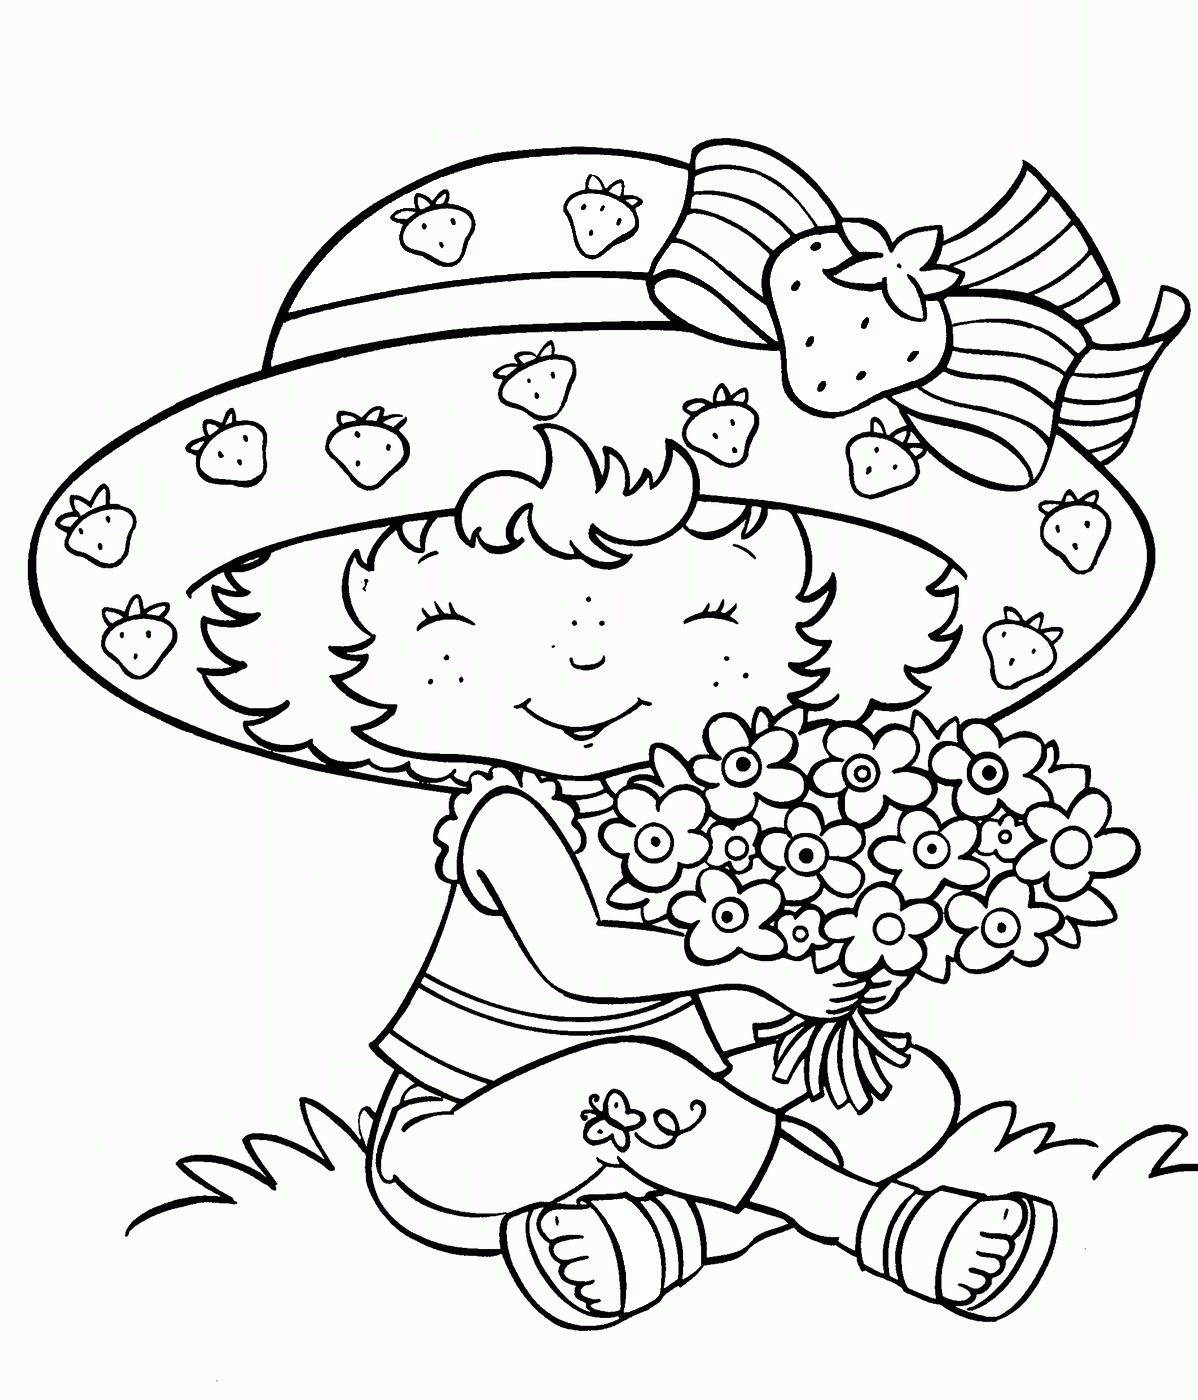 Strawberry Shortcake Coloring Pages TV Film Printable 2020 08136 Coloring4free